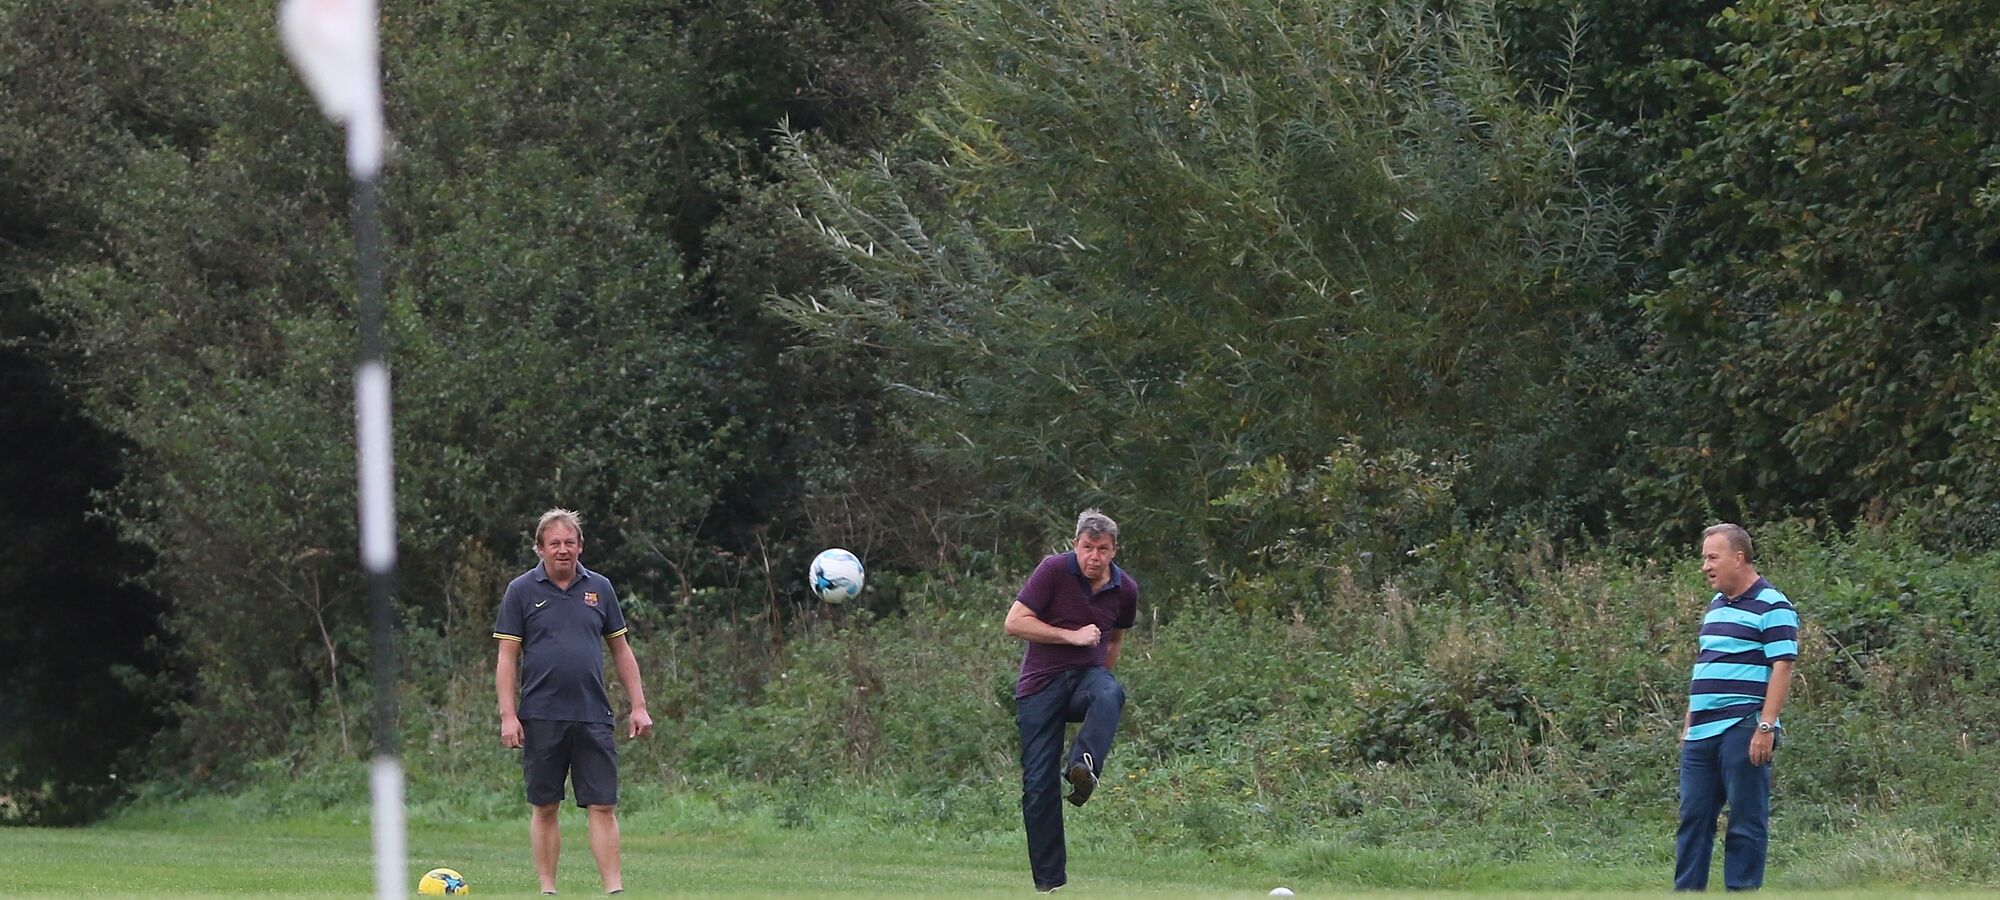 Try something new! Footgolf